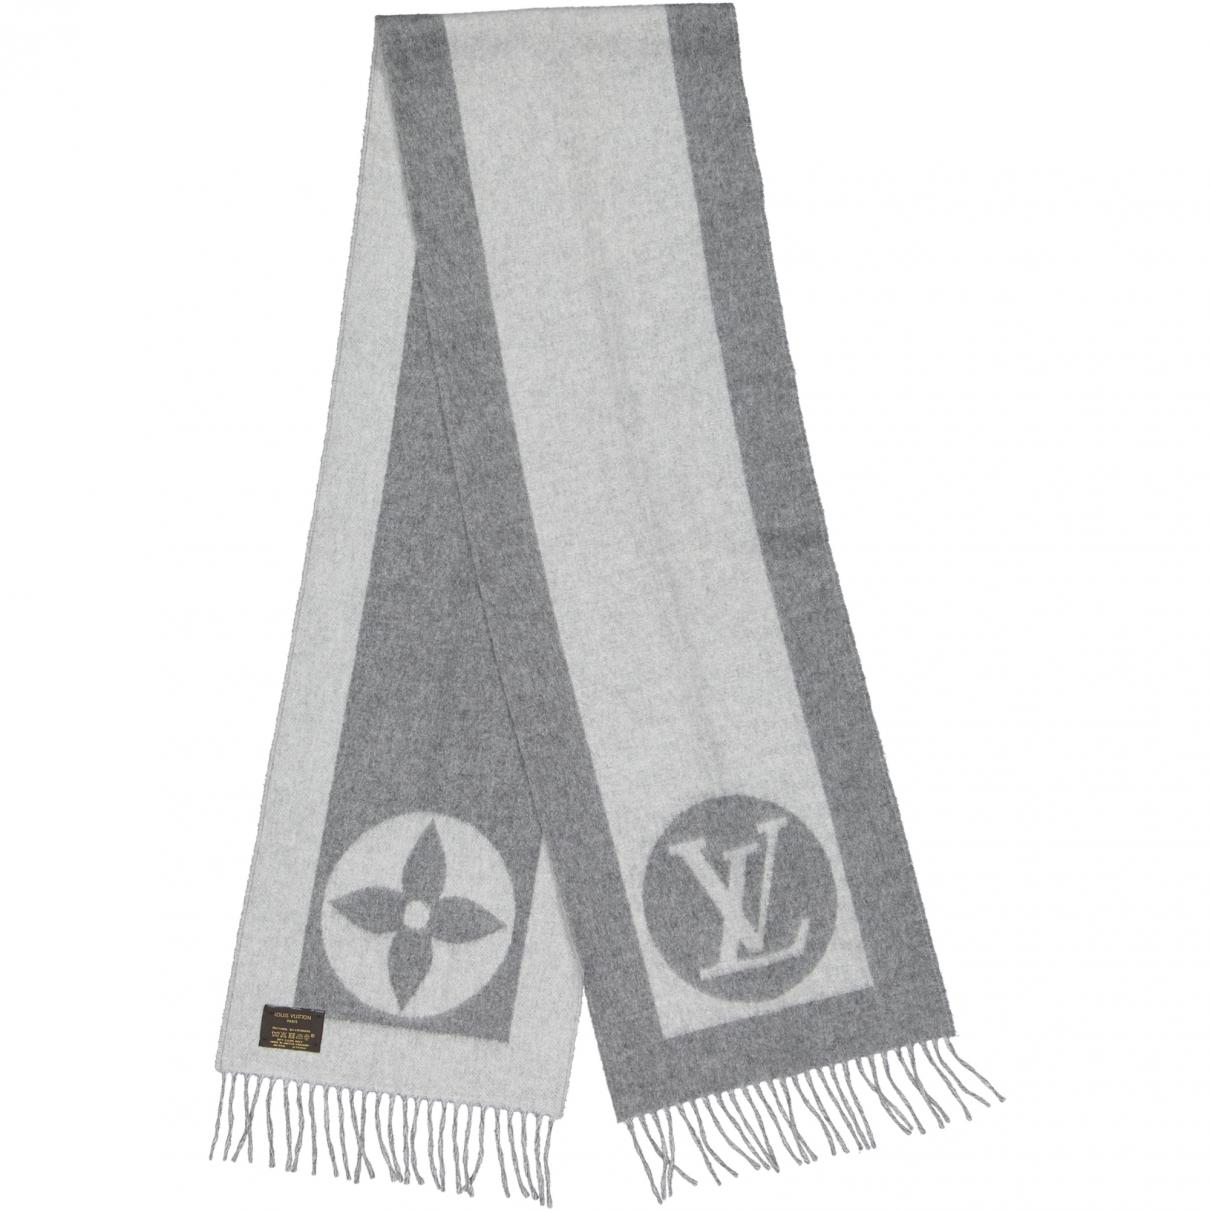 Louis Vuitton Wool Scarf & Pocket Square in Gray for Men - Lyst